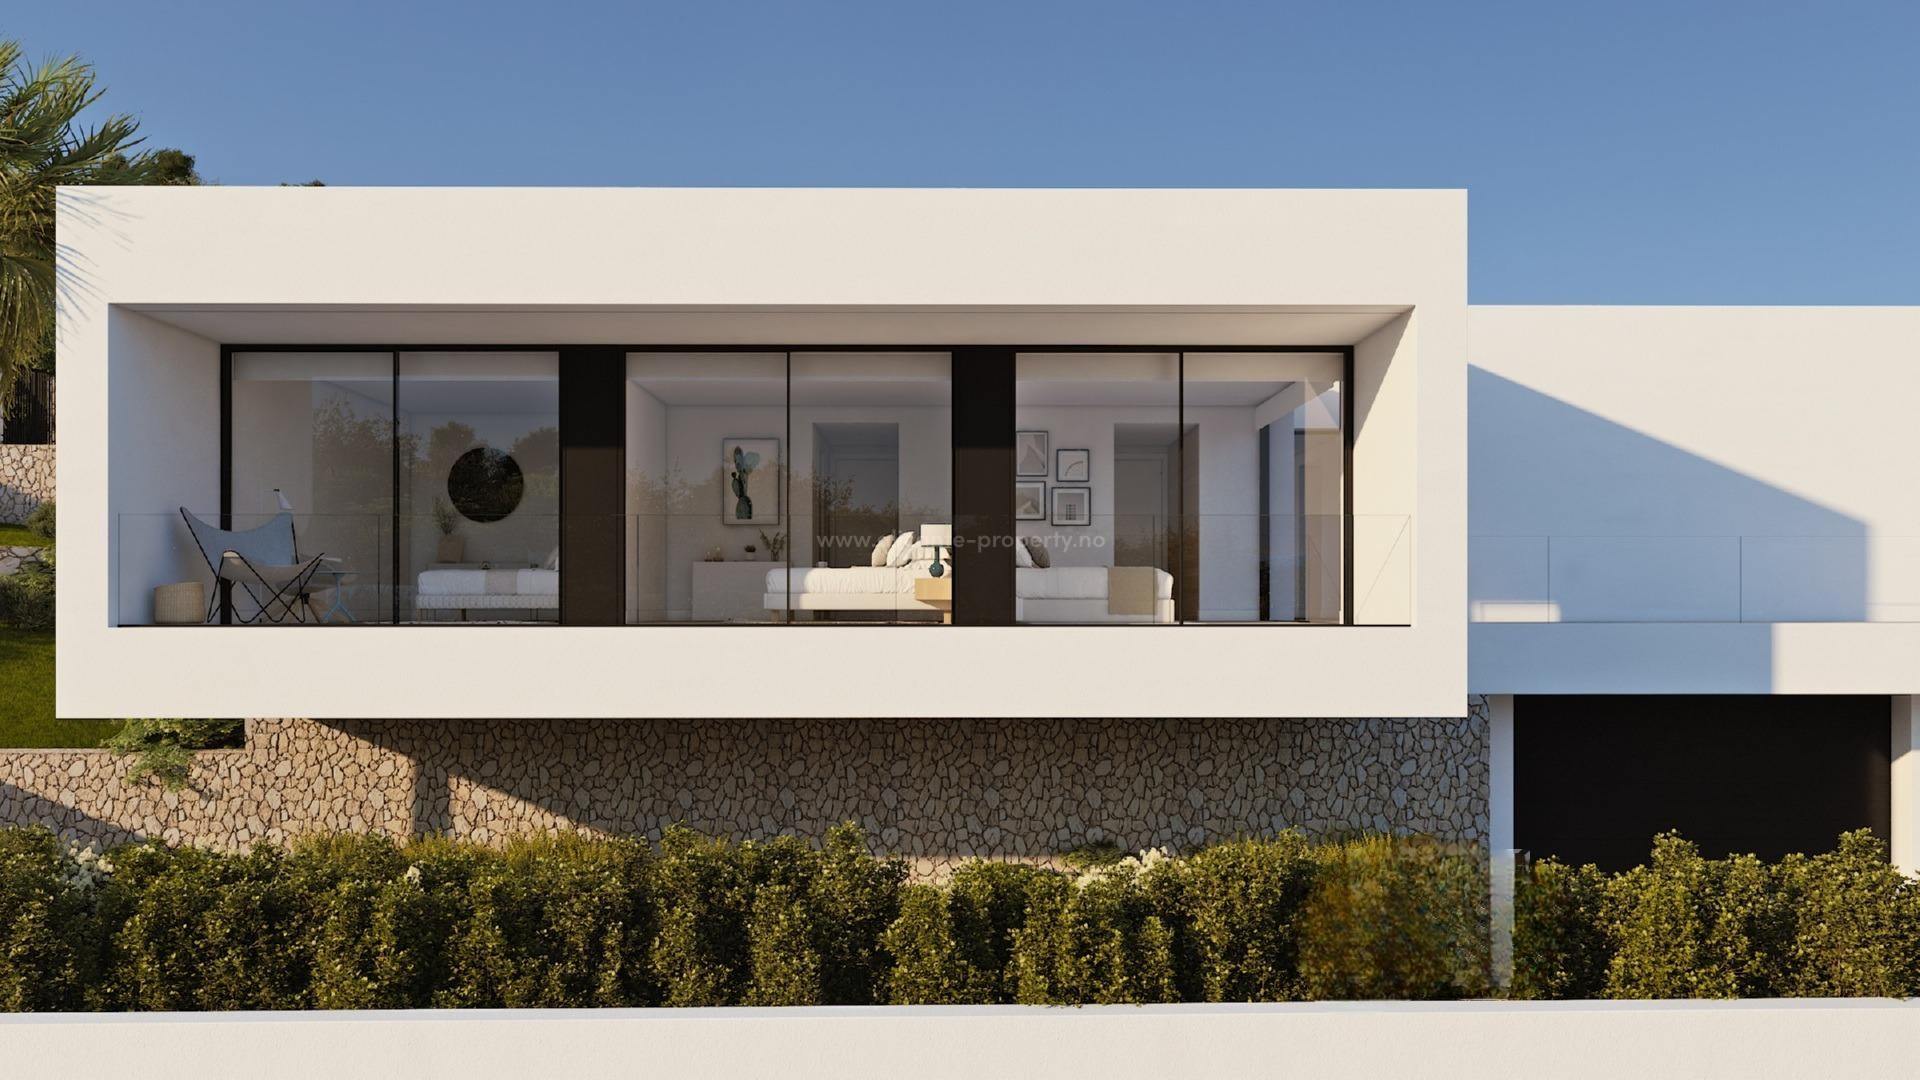 Modern new built luxury villa in Benitachell, 3 bedrooms, 5 bathrooms, parking for 4 cars, large infinity pool, 1300 square meter pl